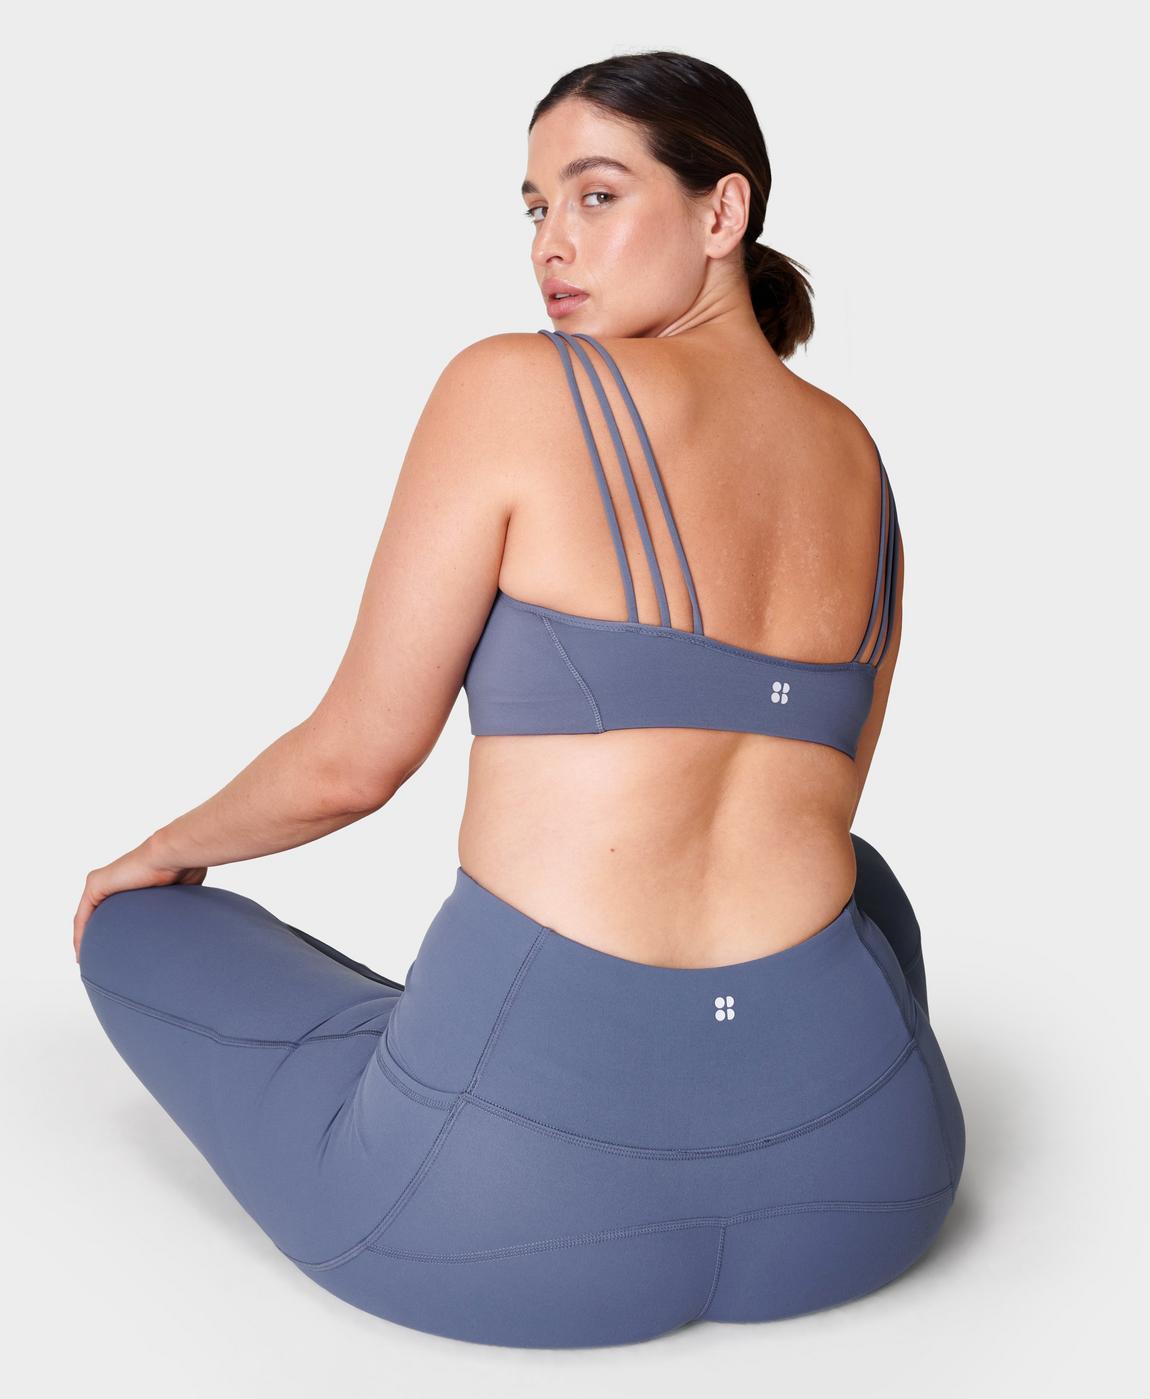 Royal Bruise Yoga Bra Blue, Made With Fair Trade Organic Cotton Incredibly  Comfortable for Yoga, Pilates or Just Working From Home -  Canada